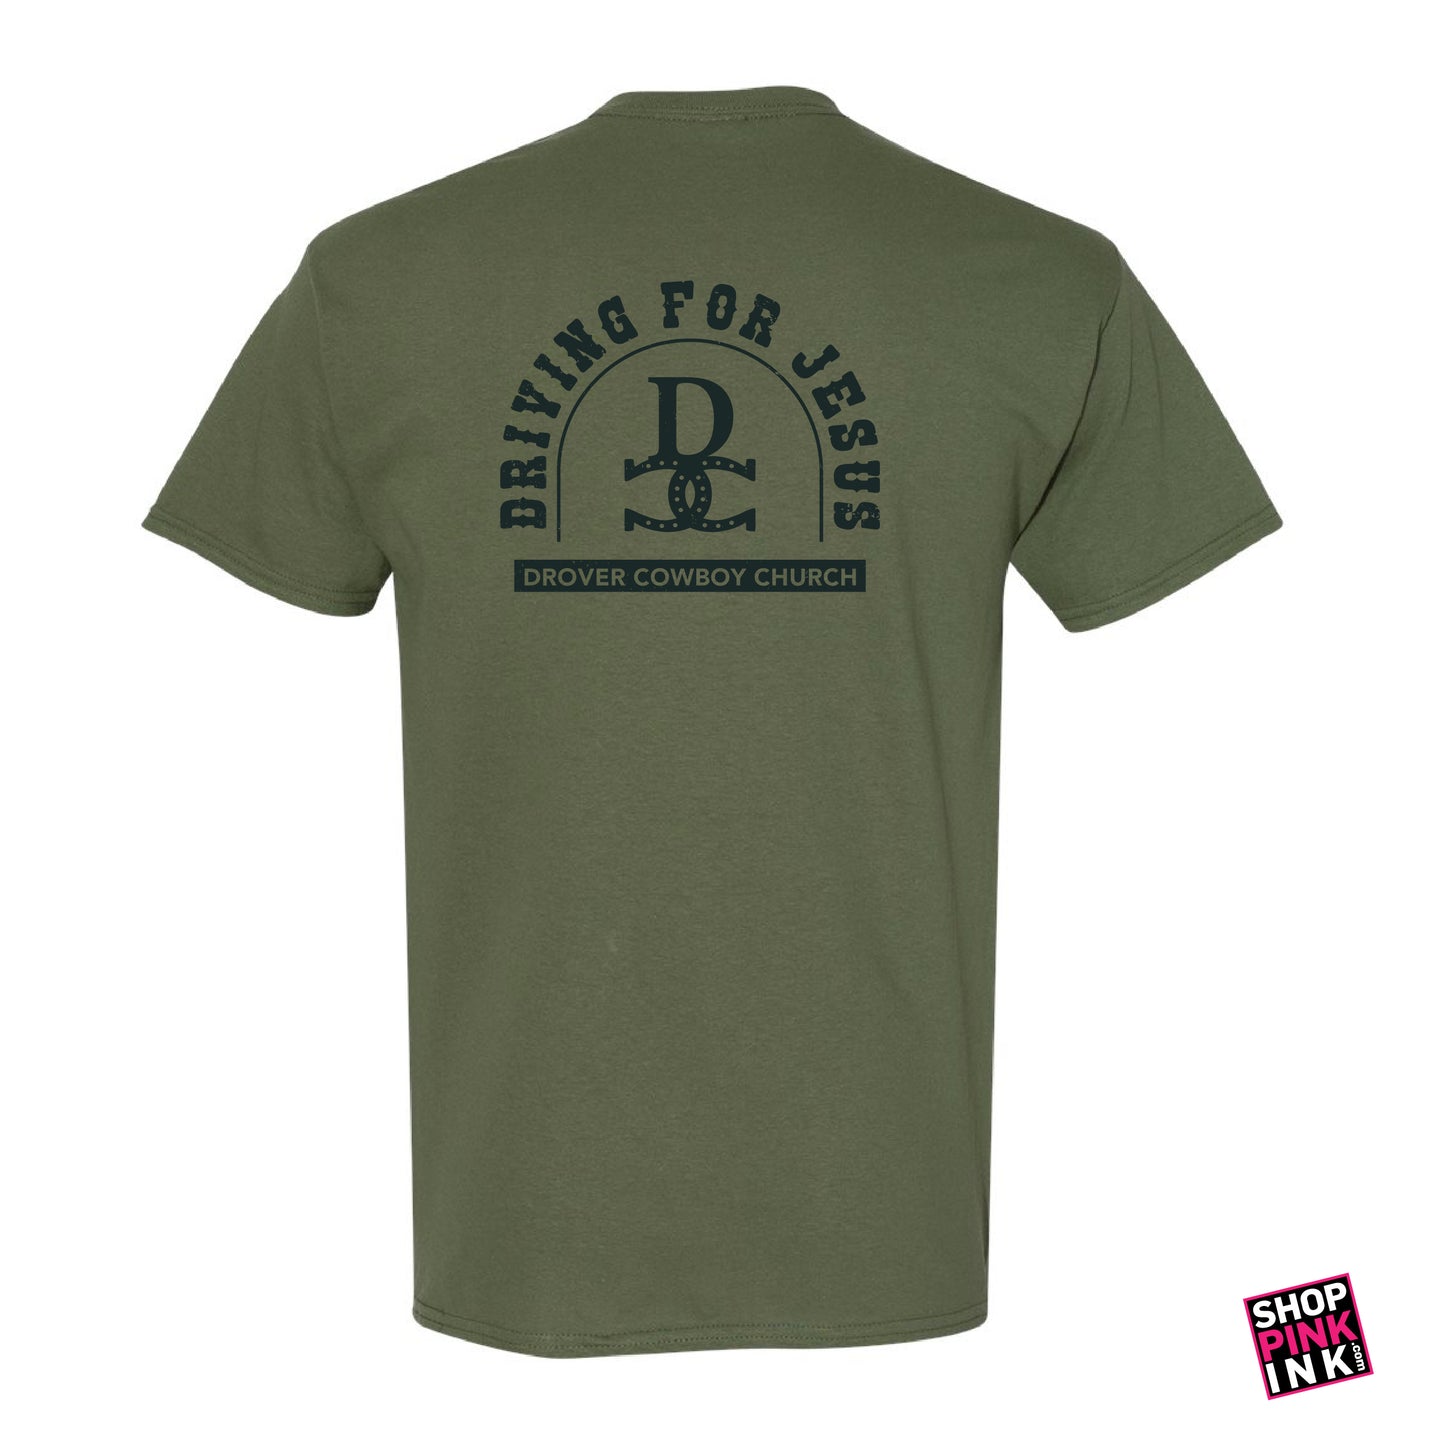 Drover Cowboy Church - Driving For Jesus - Short Sleeve - 23218